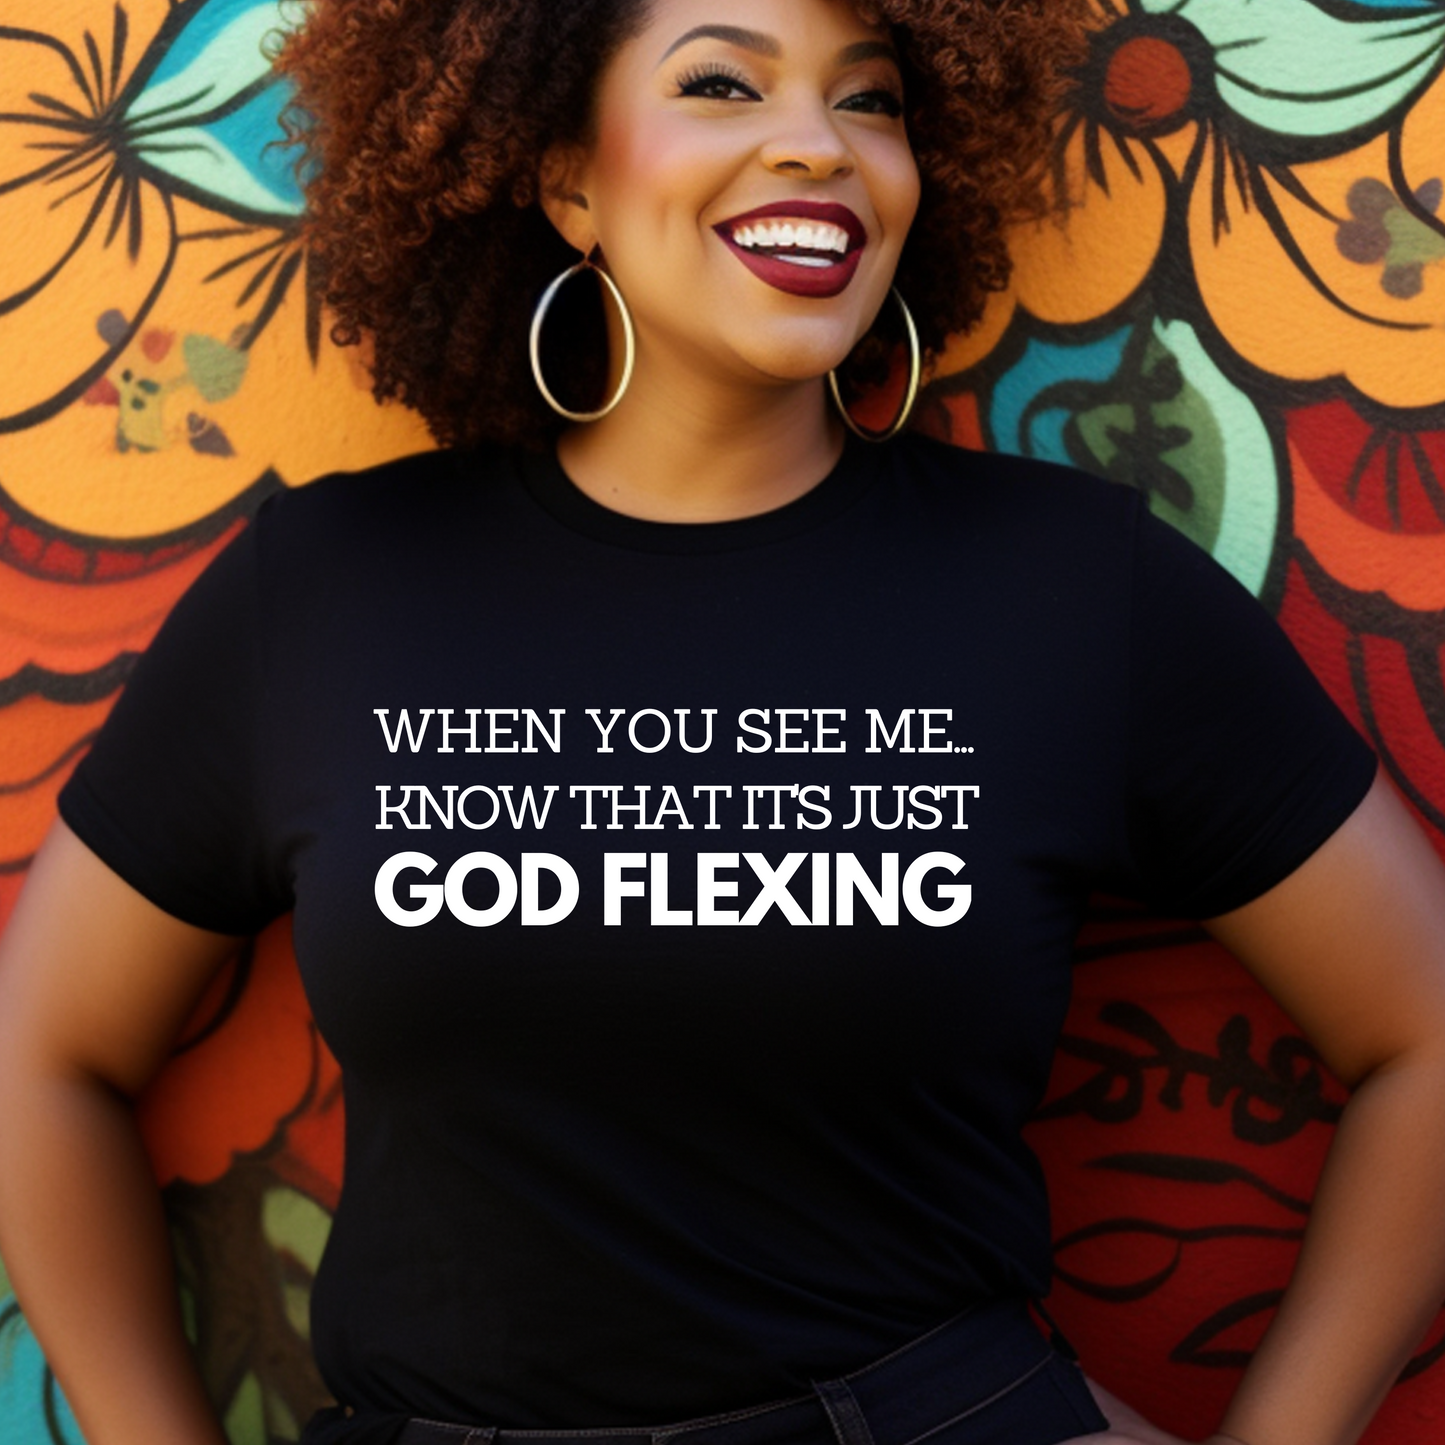 Chic black 'When You See Me Know That it's just God Flexing' T-shirt from Triumph Tees. This faith-based apparel is a trendy way to showcase your belief and express your love for God.